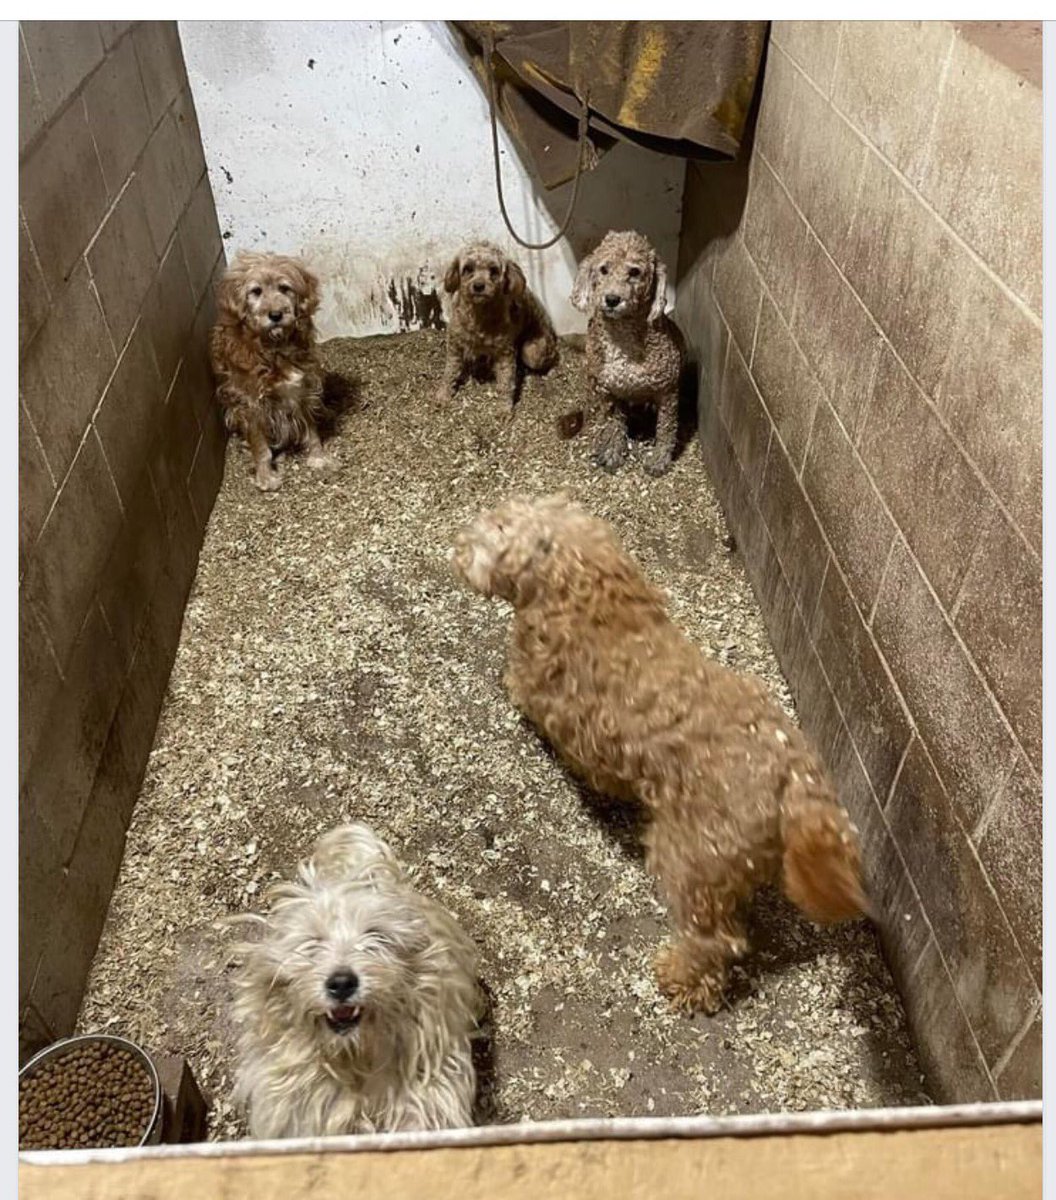 Whitewater Region, ONT - for years, horrendous puppy mill, unlicensed, not zoned. Council is negligent - just lets Tim Hubert do whatever he wants. @WhitewaterRegio @HumaneCanada @PemObserver @OttawaDogRescue @CBCOttawa @globalnews @ctvottawa